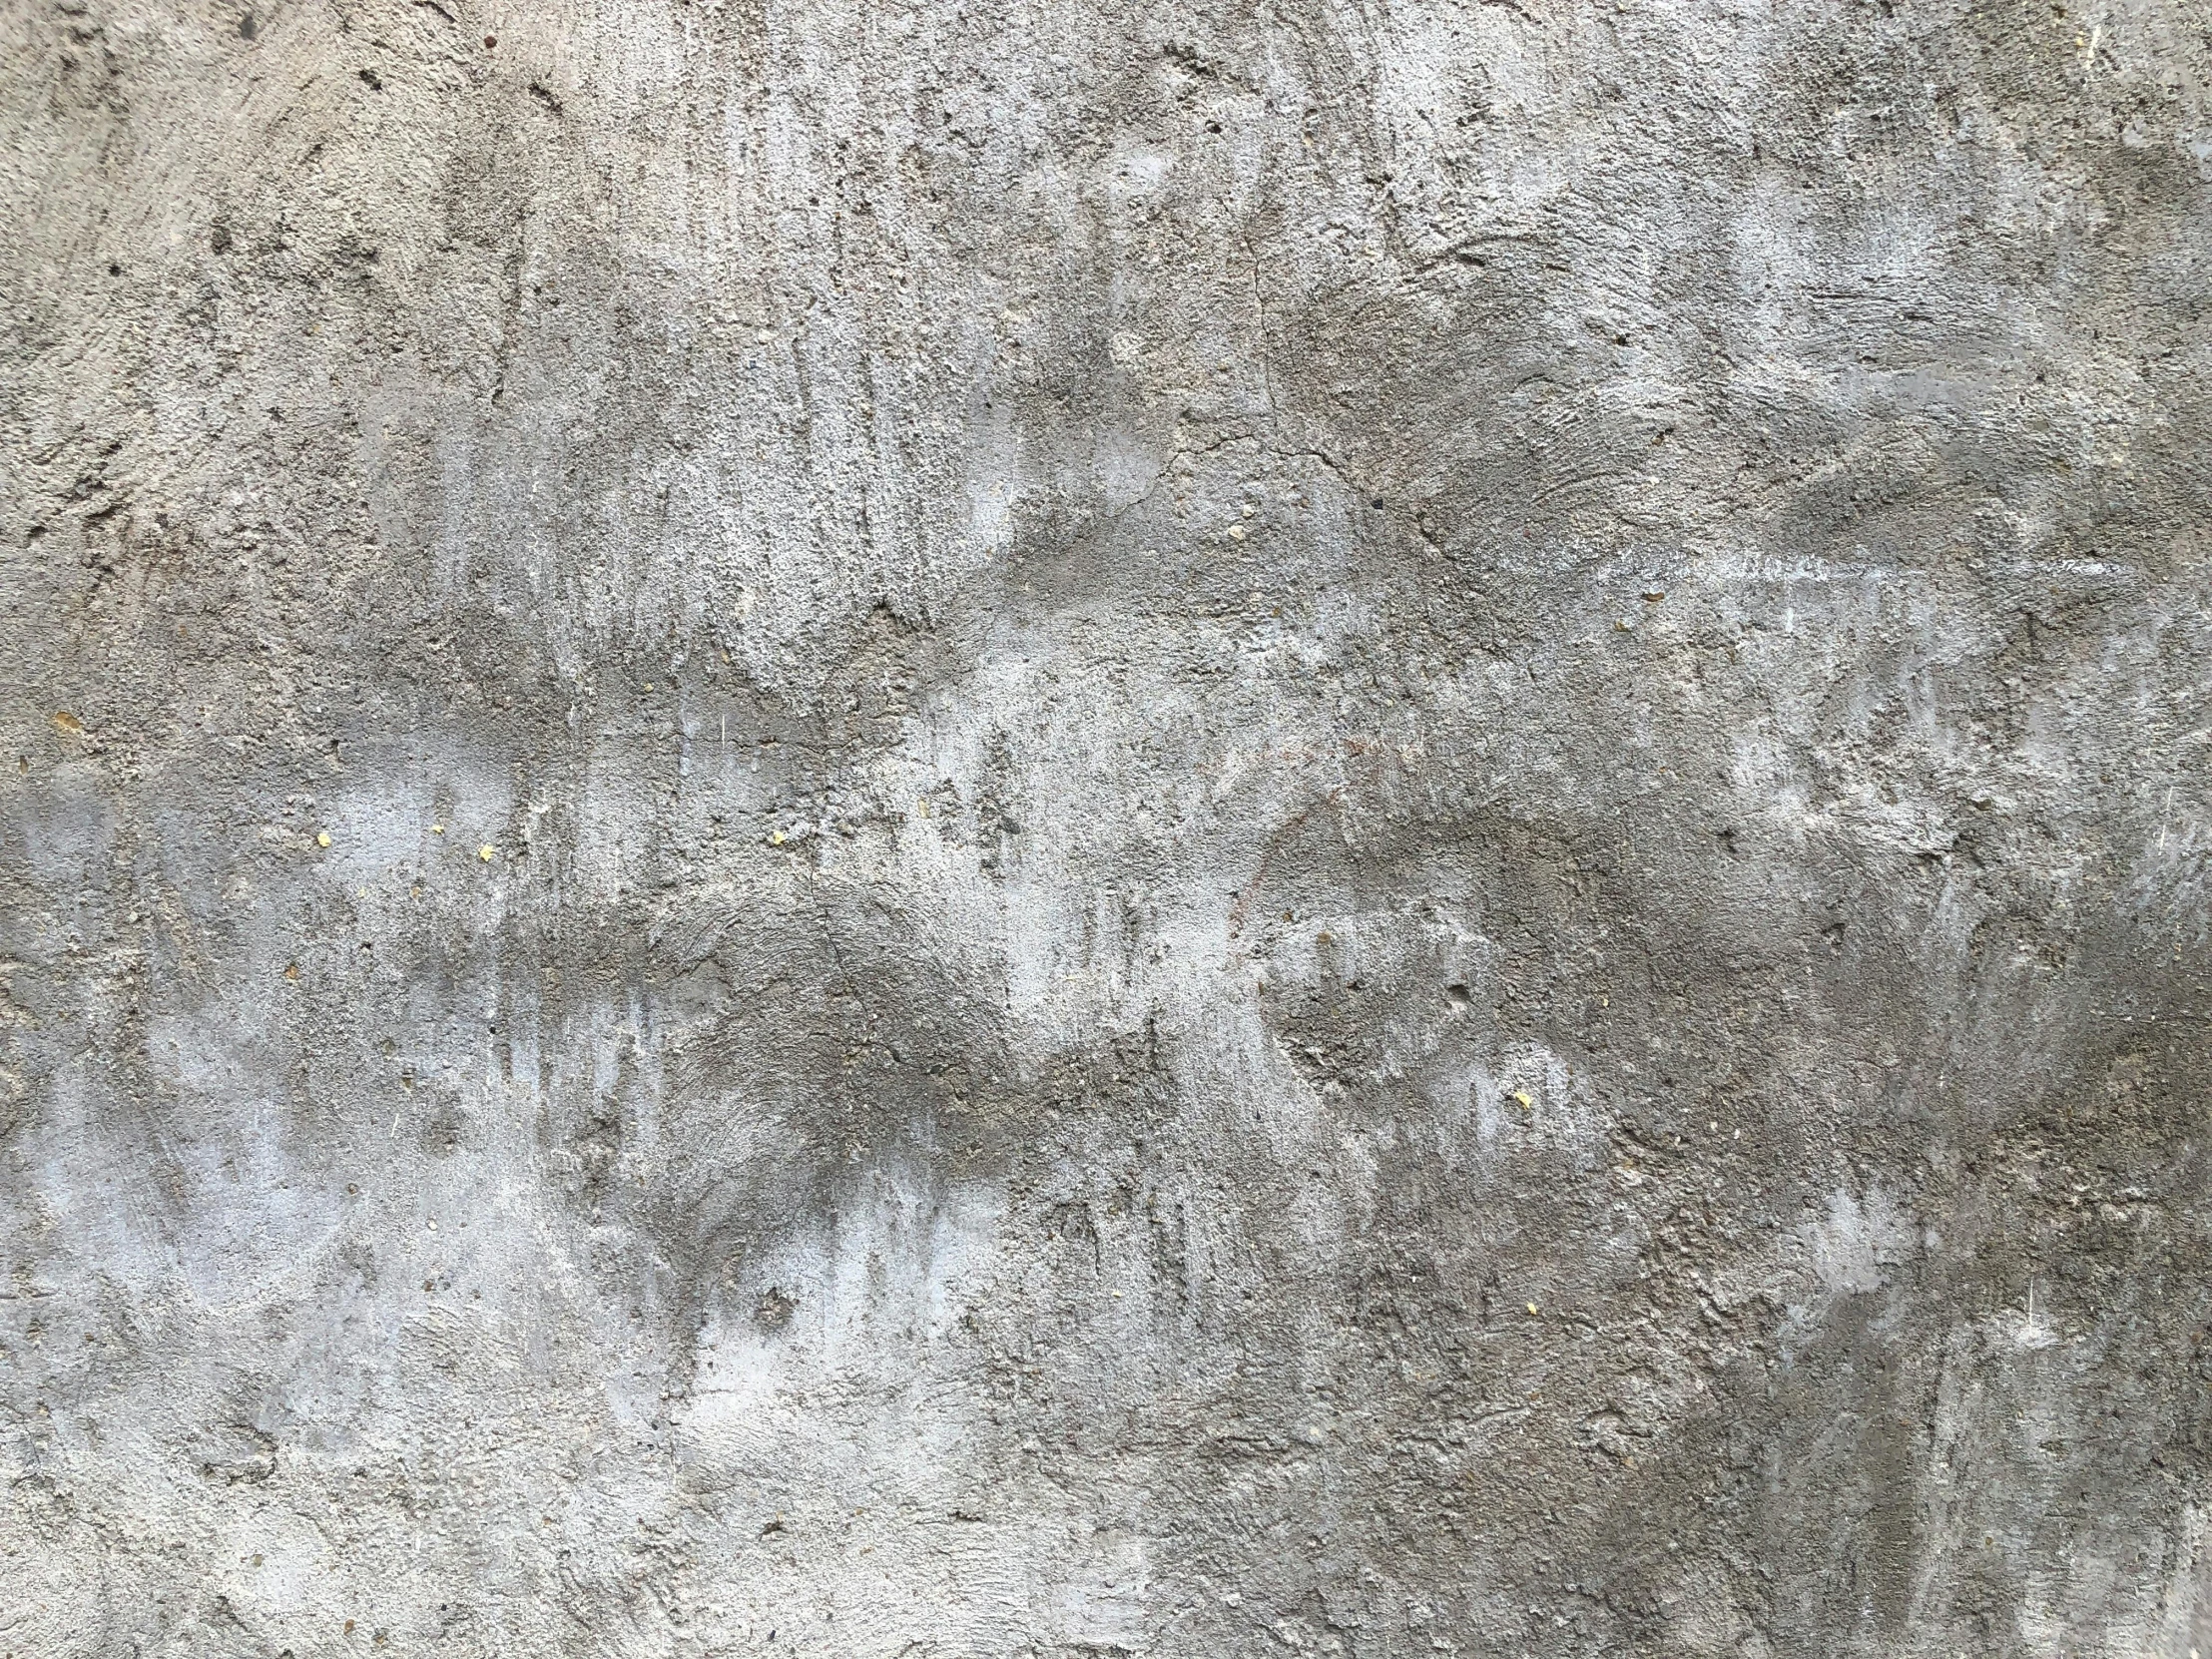 the surface of an old, grey concrete wall with no mortar